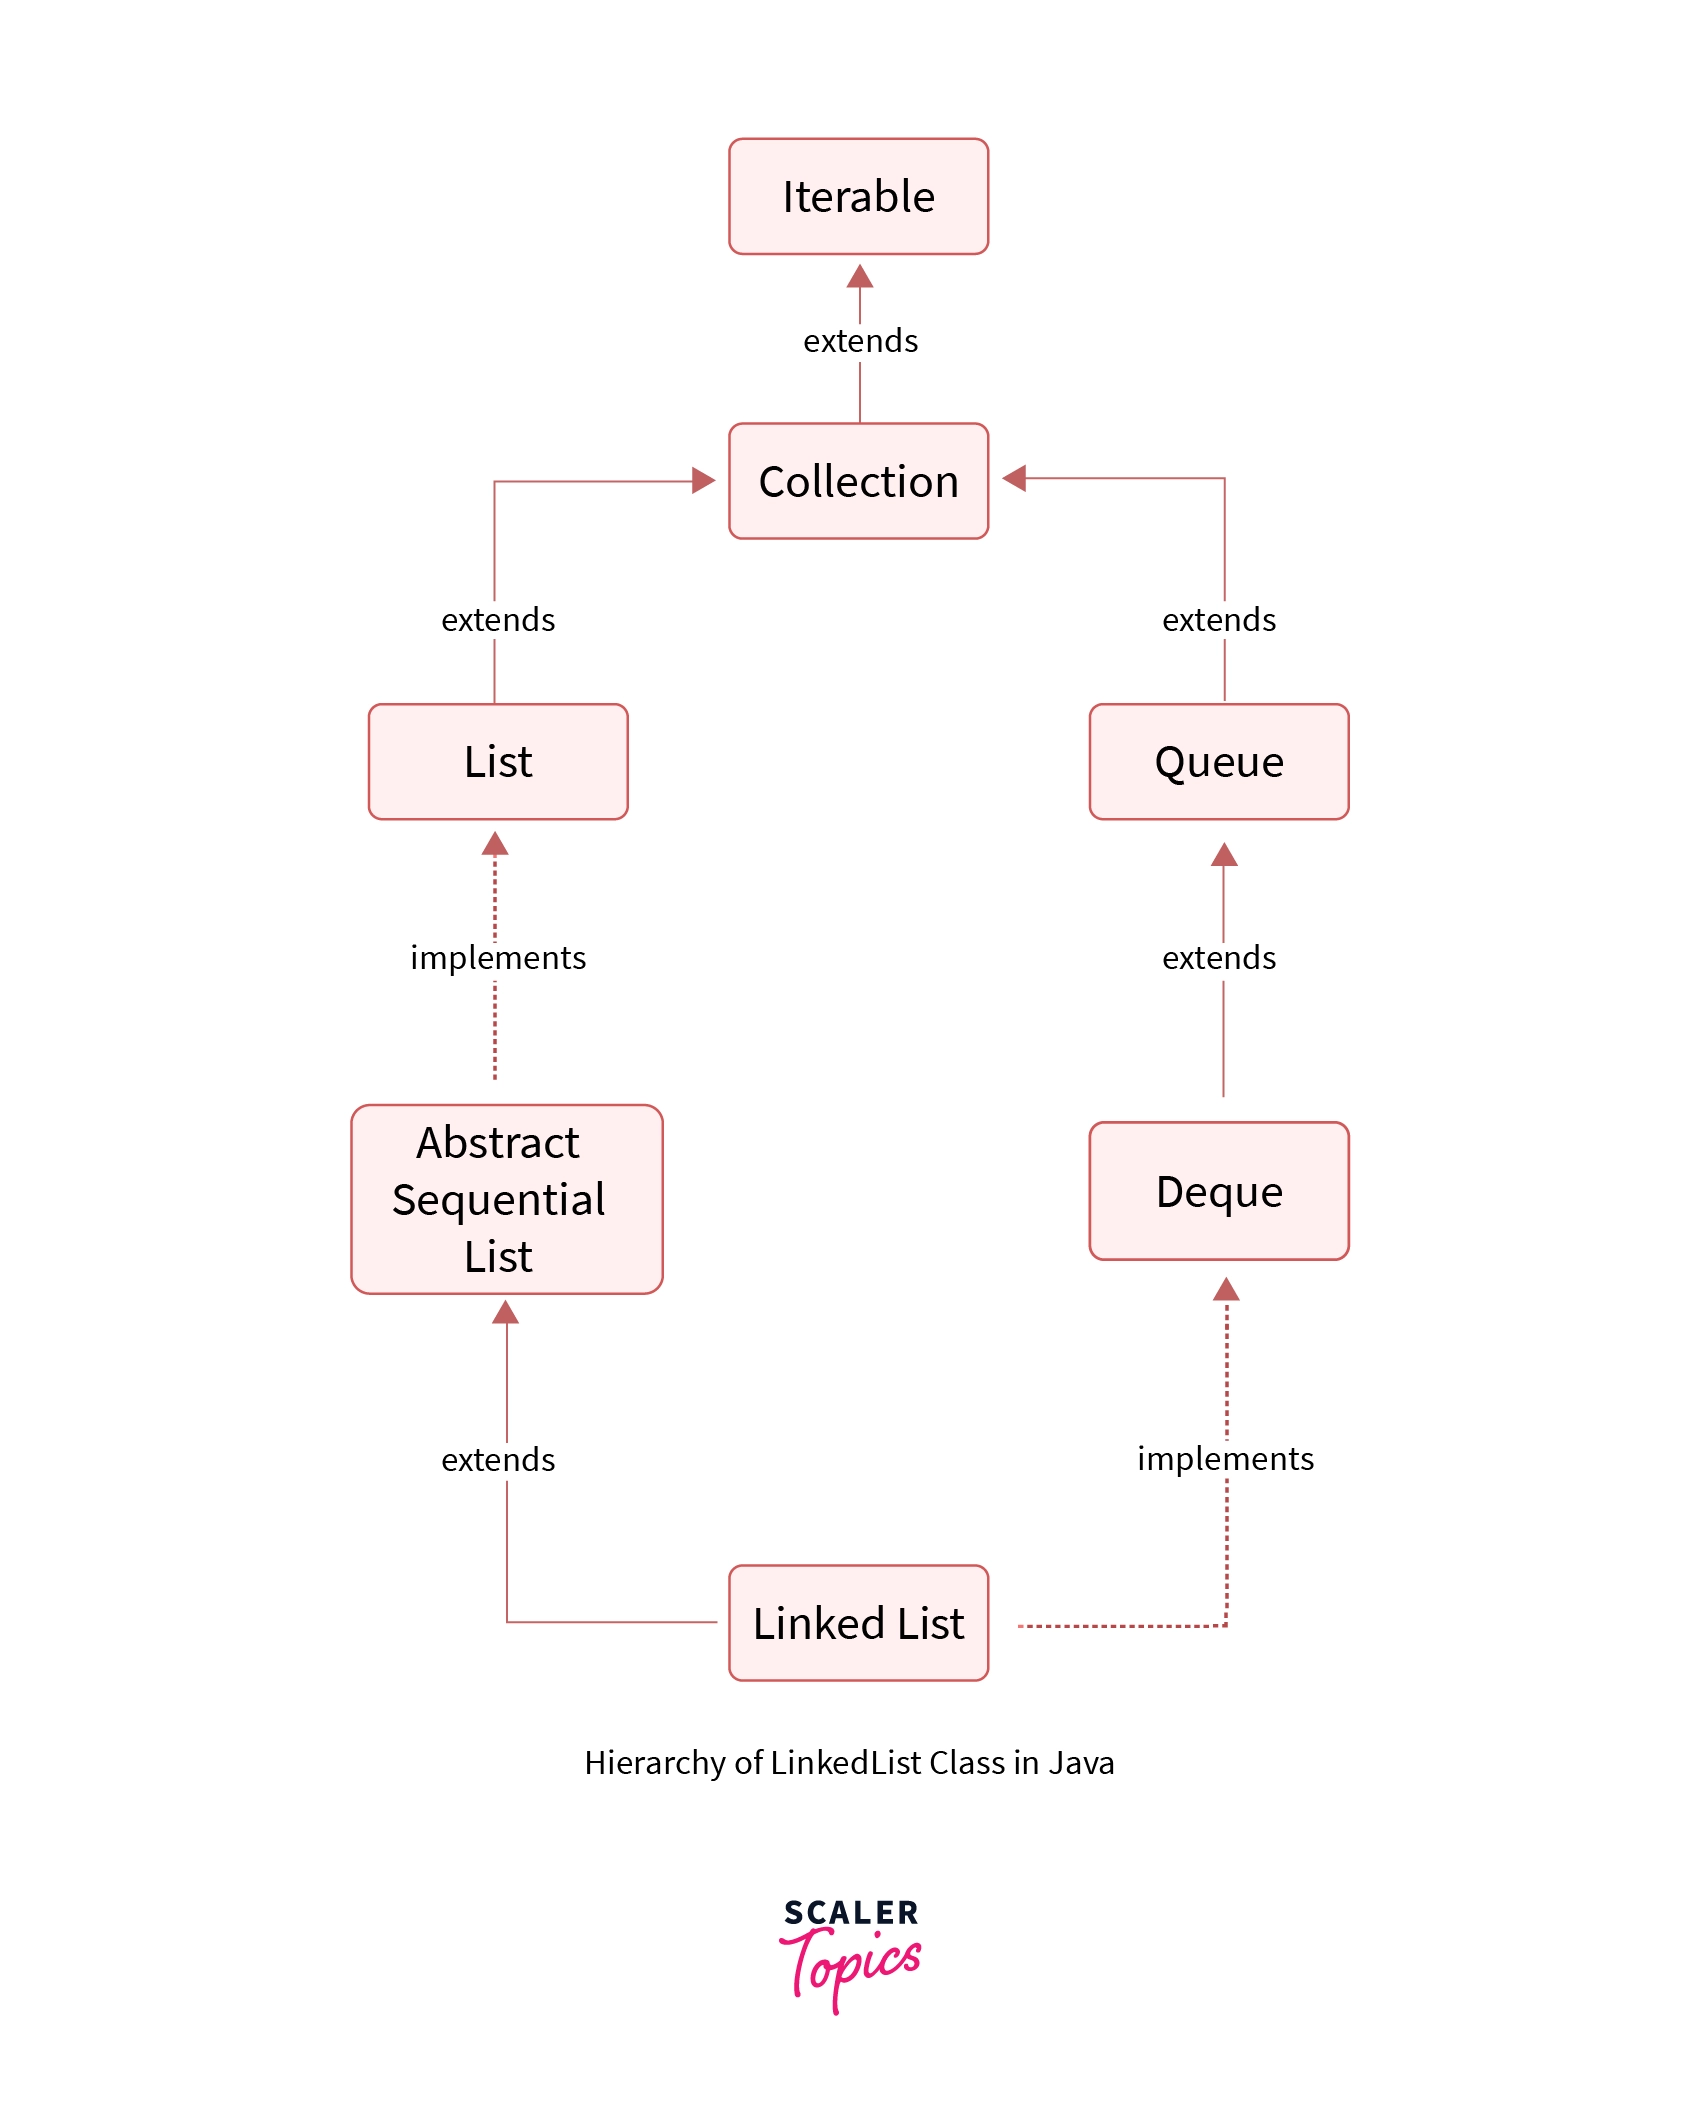 Hierarchy of LinkedList class in Java